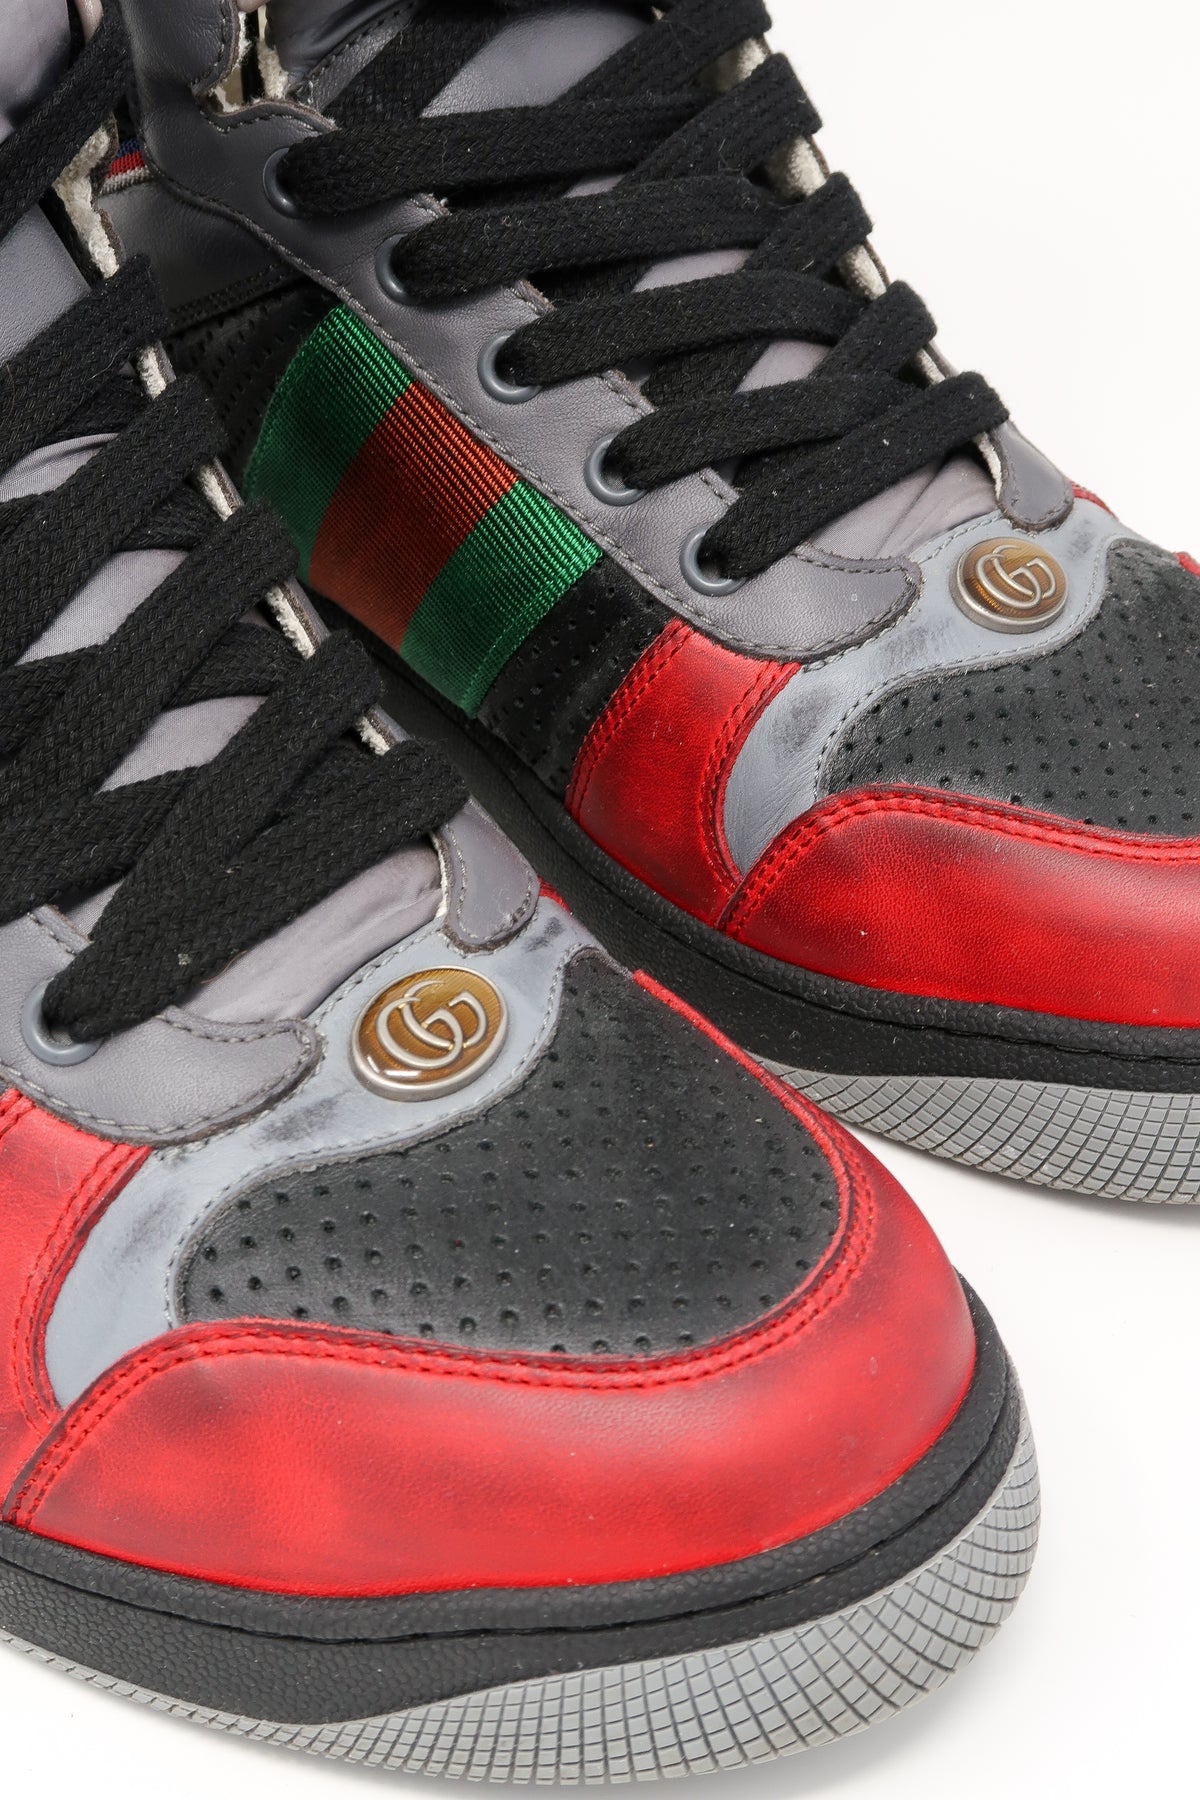 vedlægge Kalkun hit Gucci Men's High Top Sneakers | Luxury Finds Consignment